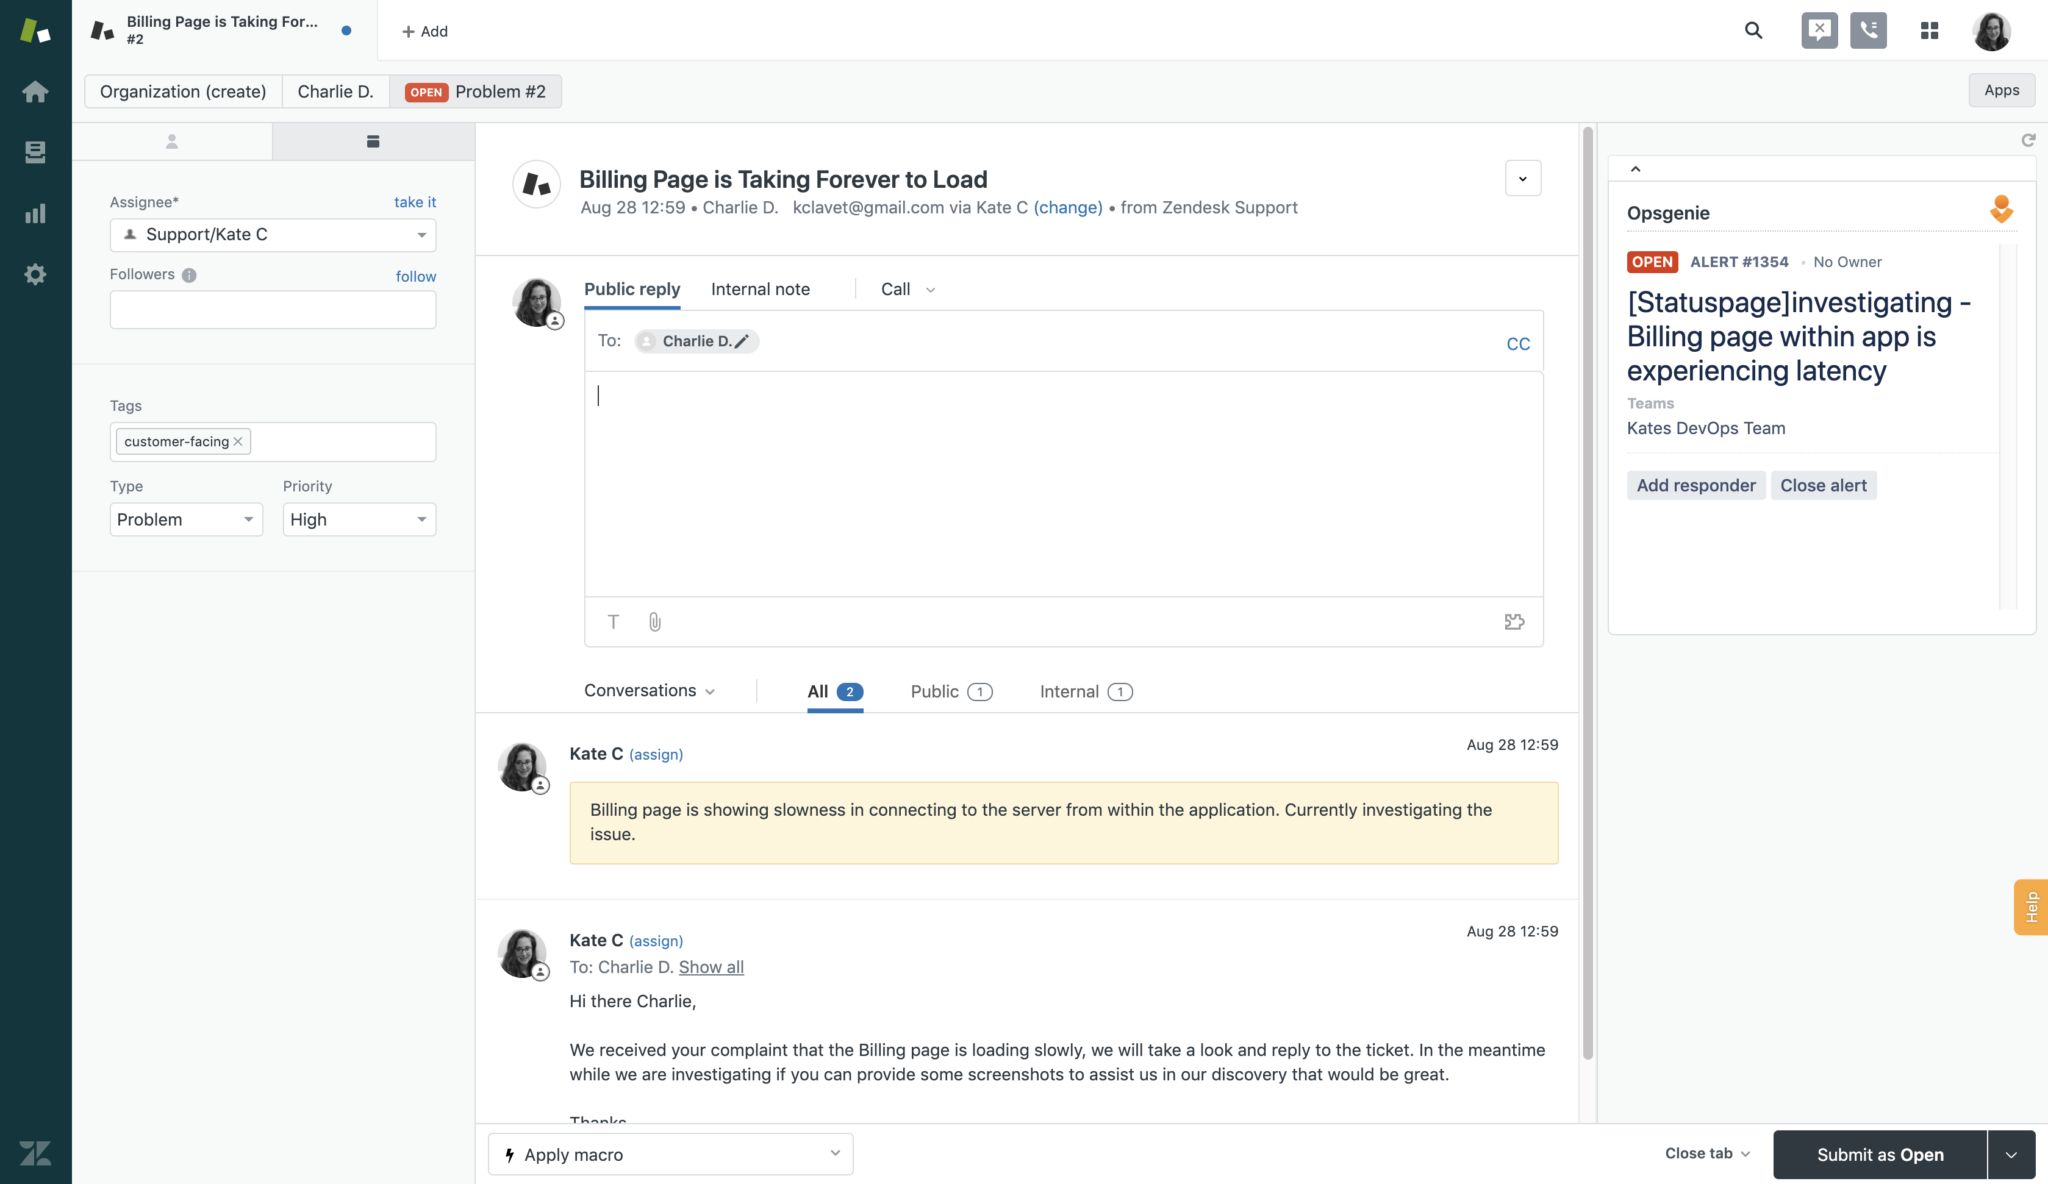 Use the Opsgenie app in Zendesk to manual create alerts directly from the Zendesk UI.